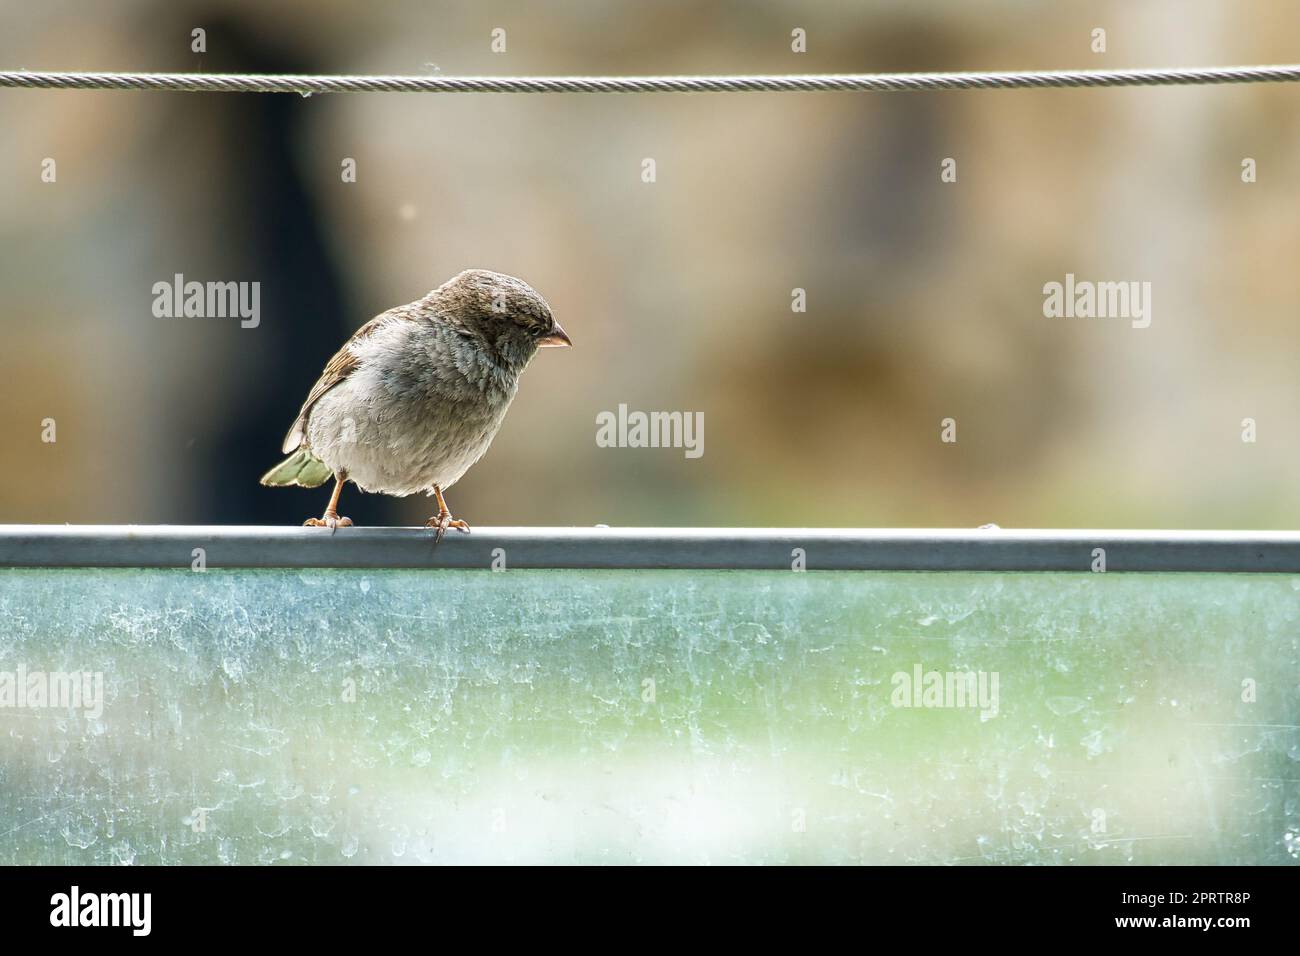 brown sparrow sitting on a wire rope. small songbird with beautiful plumage. Stock Photo